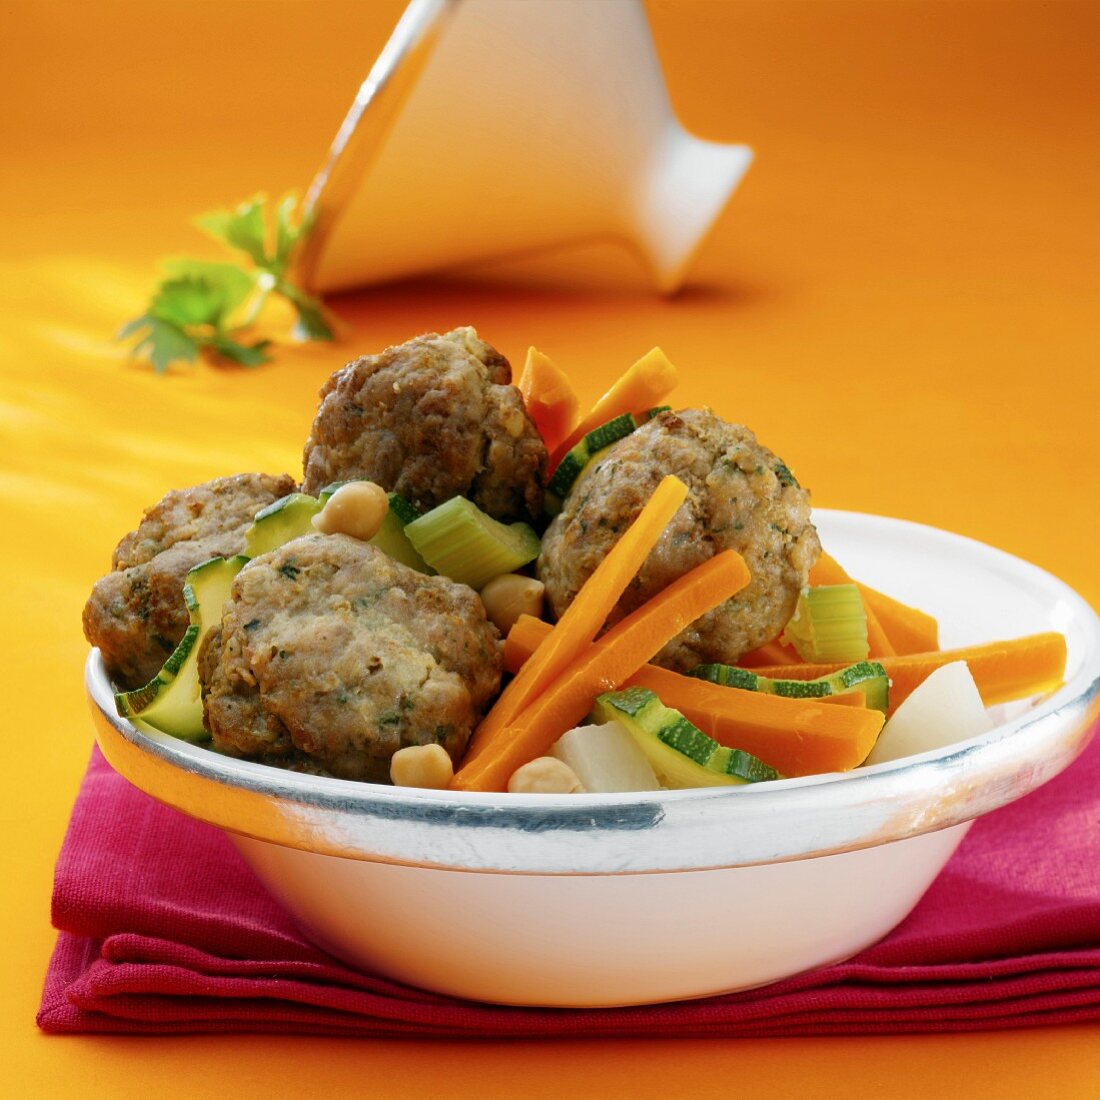 Couscous with meatballs